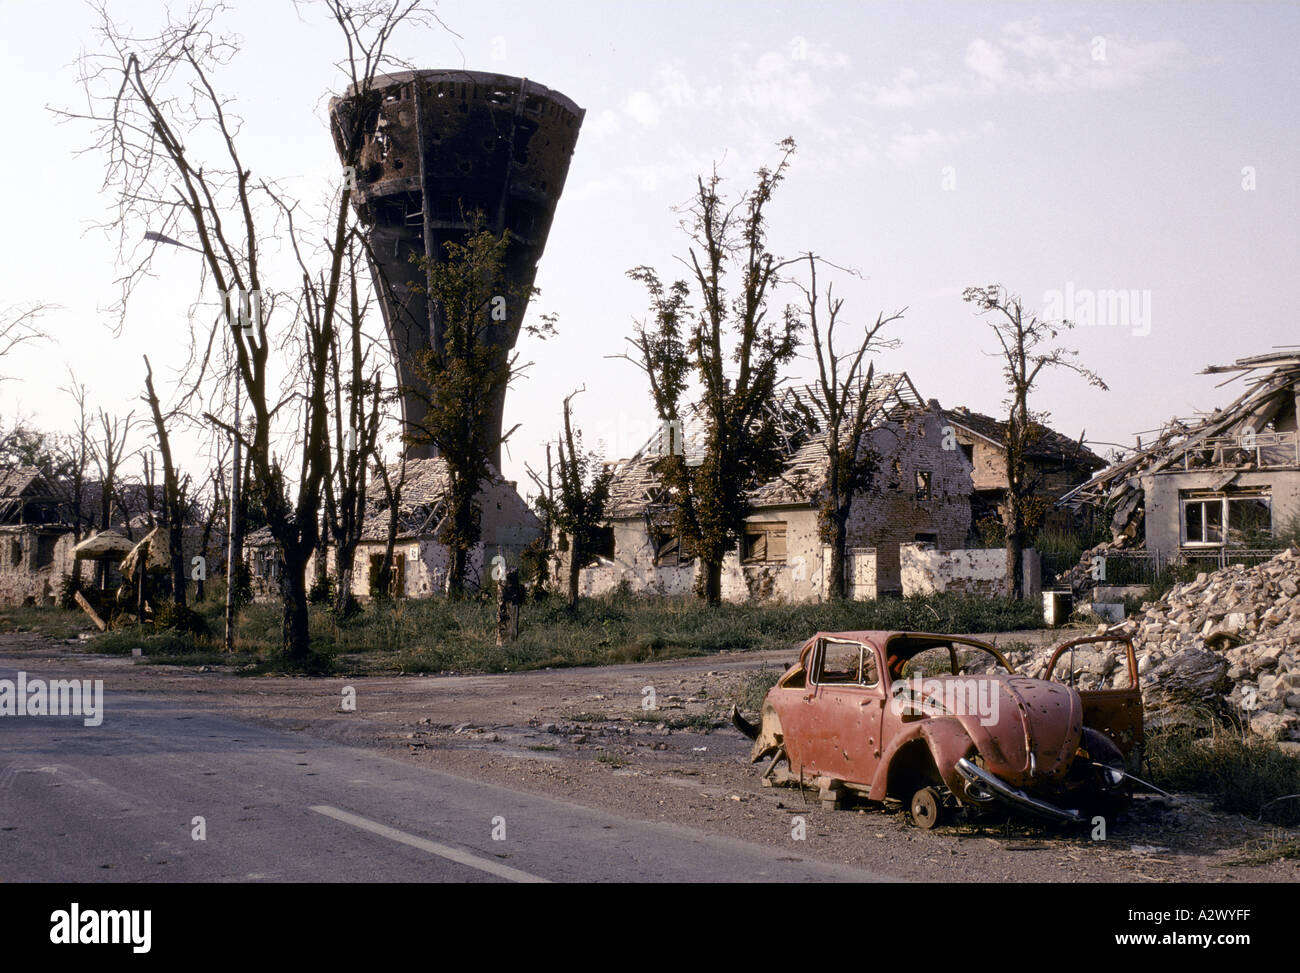 Vukovar, Croatia, under Serb control,  Feb 1992: The destroyed water tower stands above the rubble and blasted trees Stock Photo